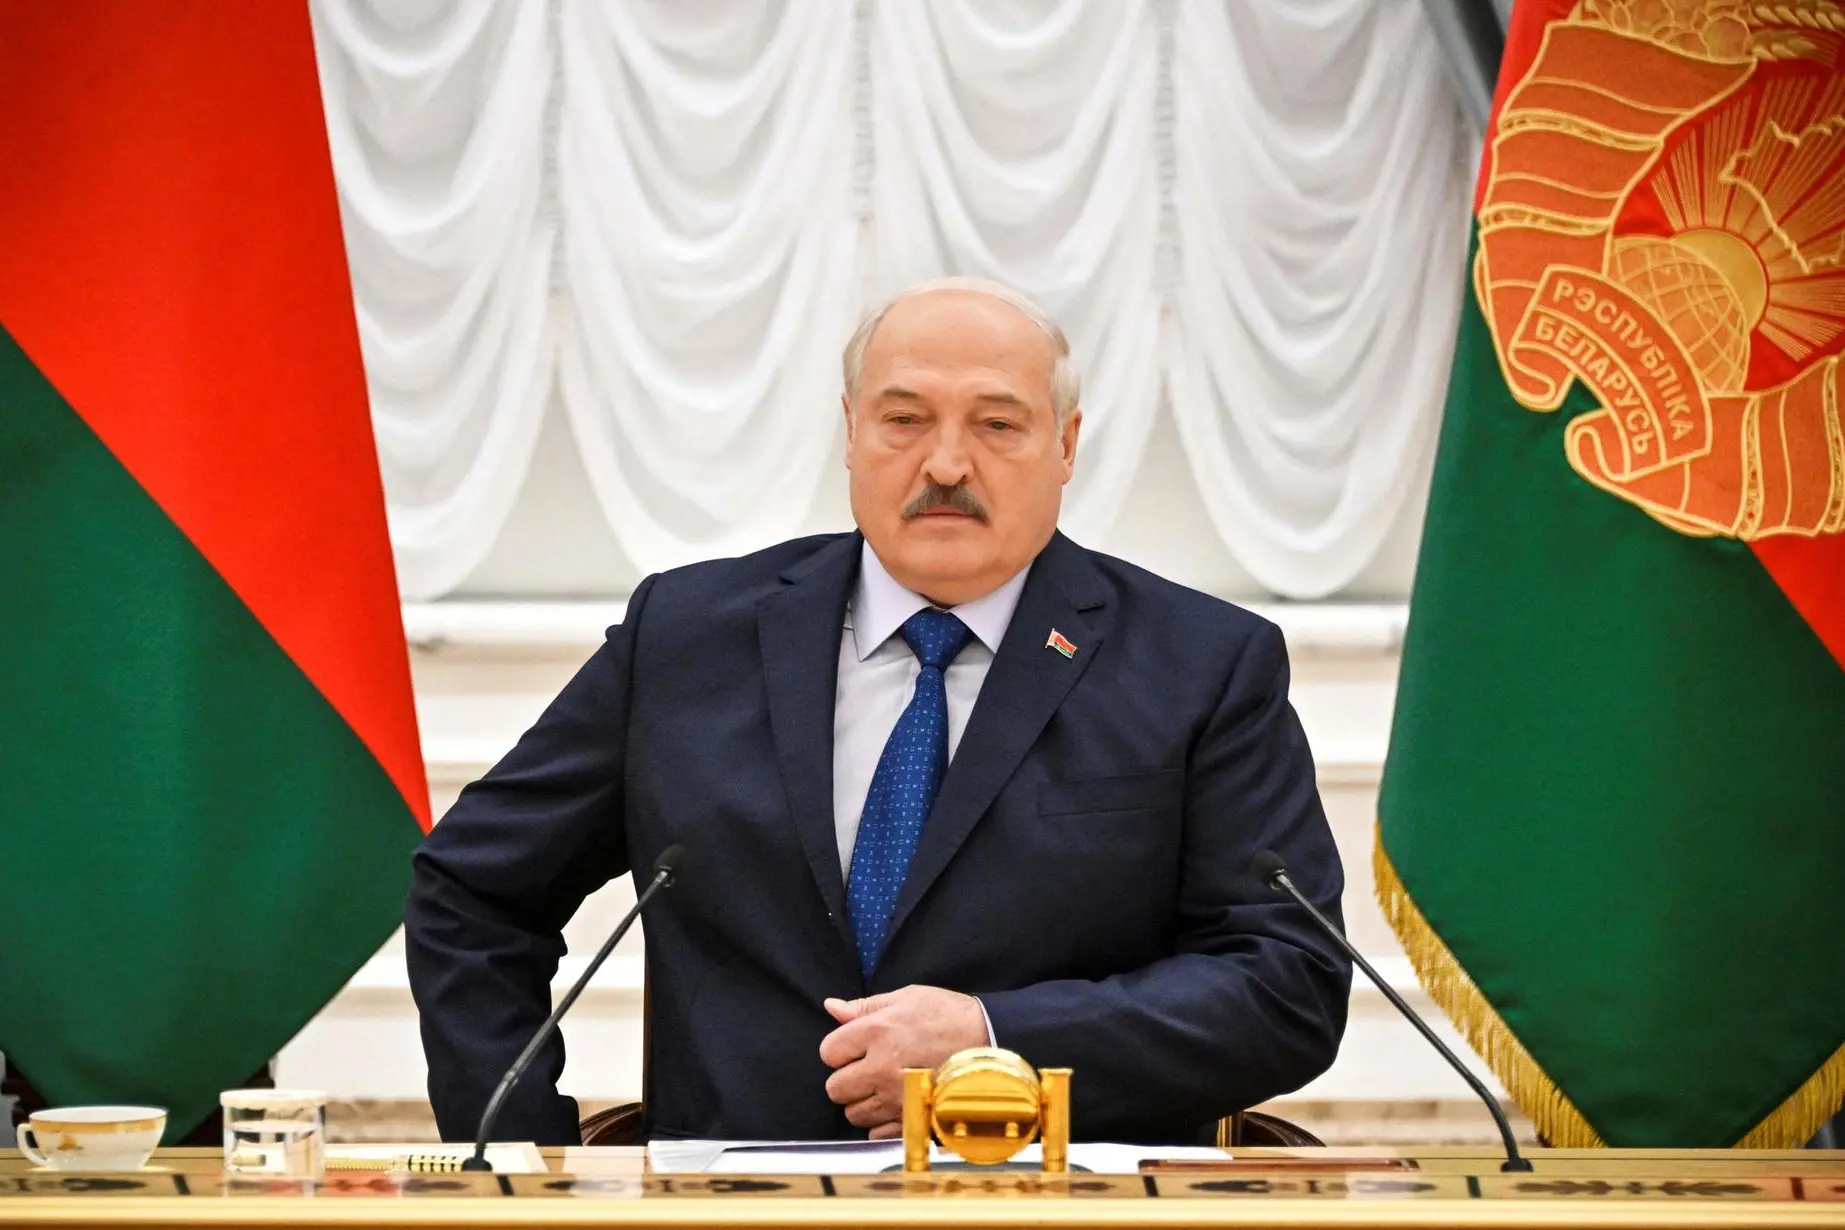 Belarus' President Alexander Lukashenko meets with foreign media at his residence, the Independence Palace, in the capital Minsk on July 6, 2023. Wagner chief Yevgeny Prigozhin is still in Russia, Belarus's president said on July 6, 2023, despite a deal with the Kremlin for him to move to Belarus following his failed insurrection last month. (Photo by Alexander NEMENOV / AFP)